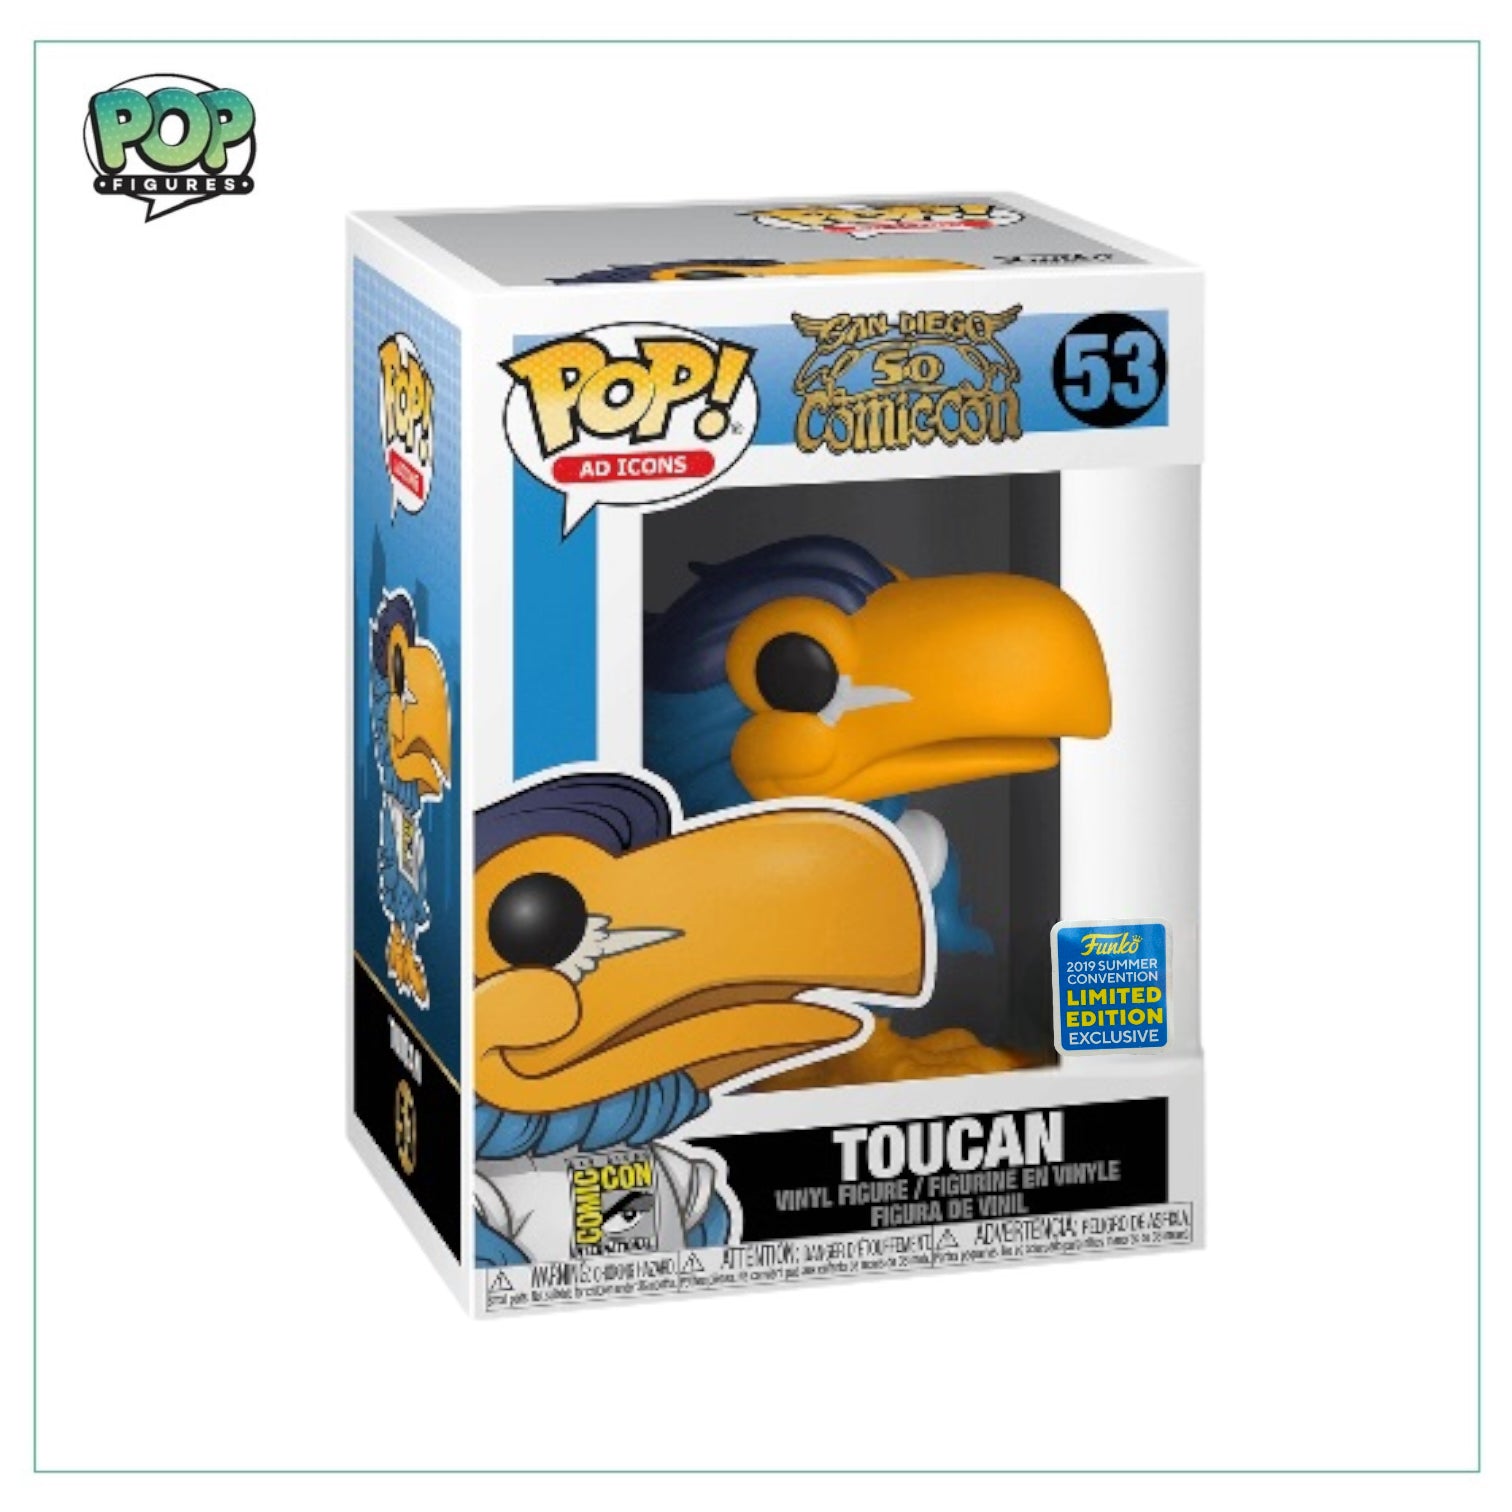 Toucan #53 Funko Pop! - 2019 SDCC Shared Exclusive - 2019 Pop - Condition 9/10